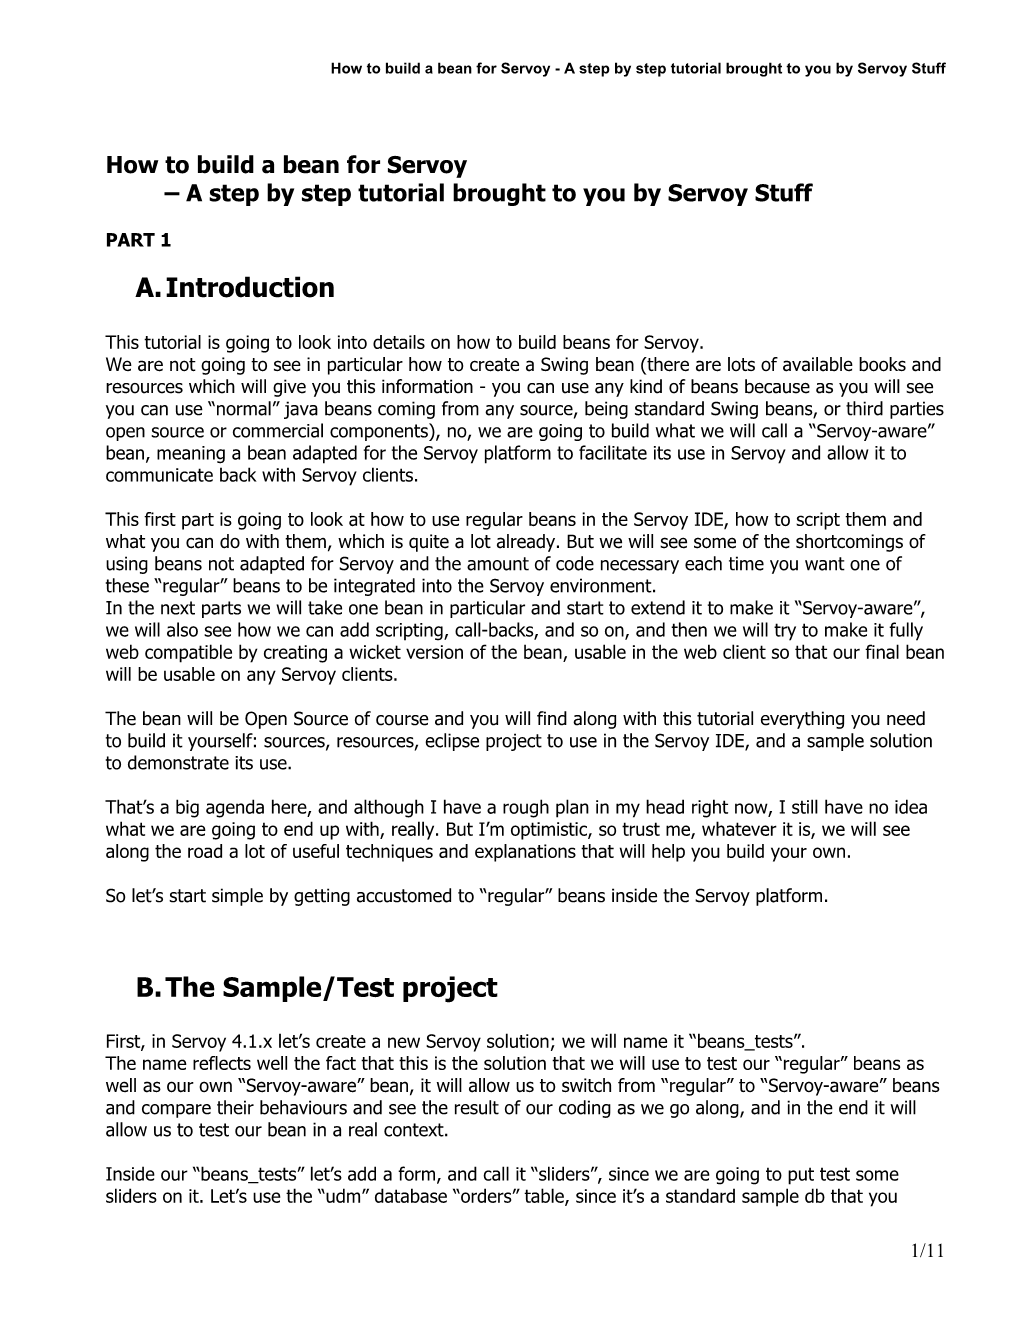 Step by Step Tutorial: How to Build a Bean for Servoy